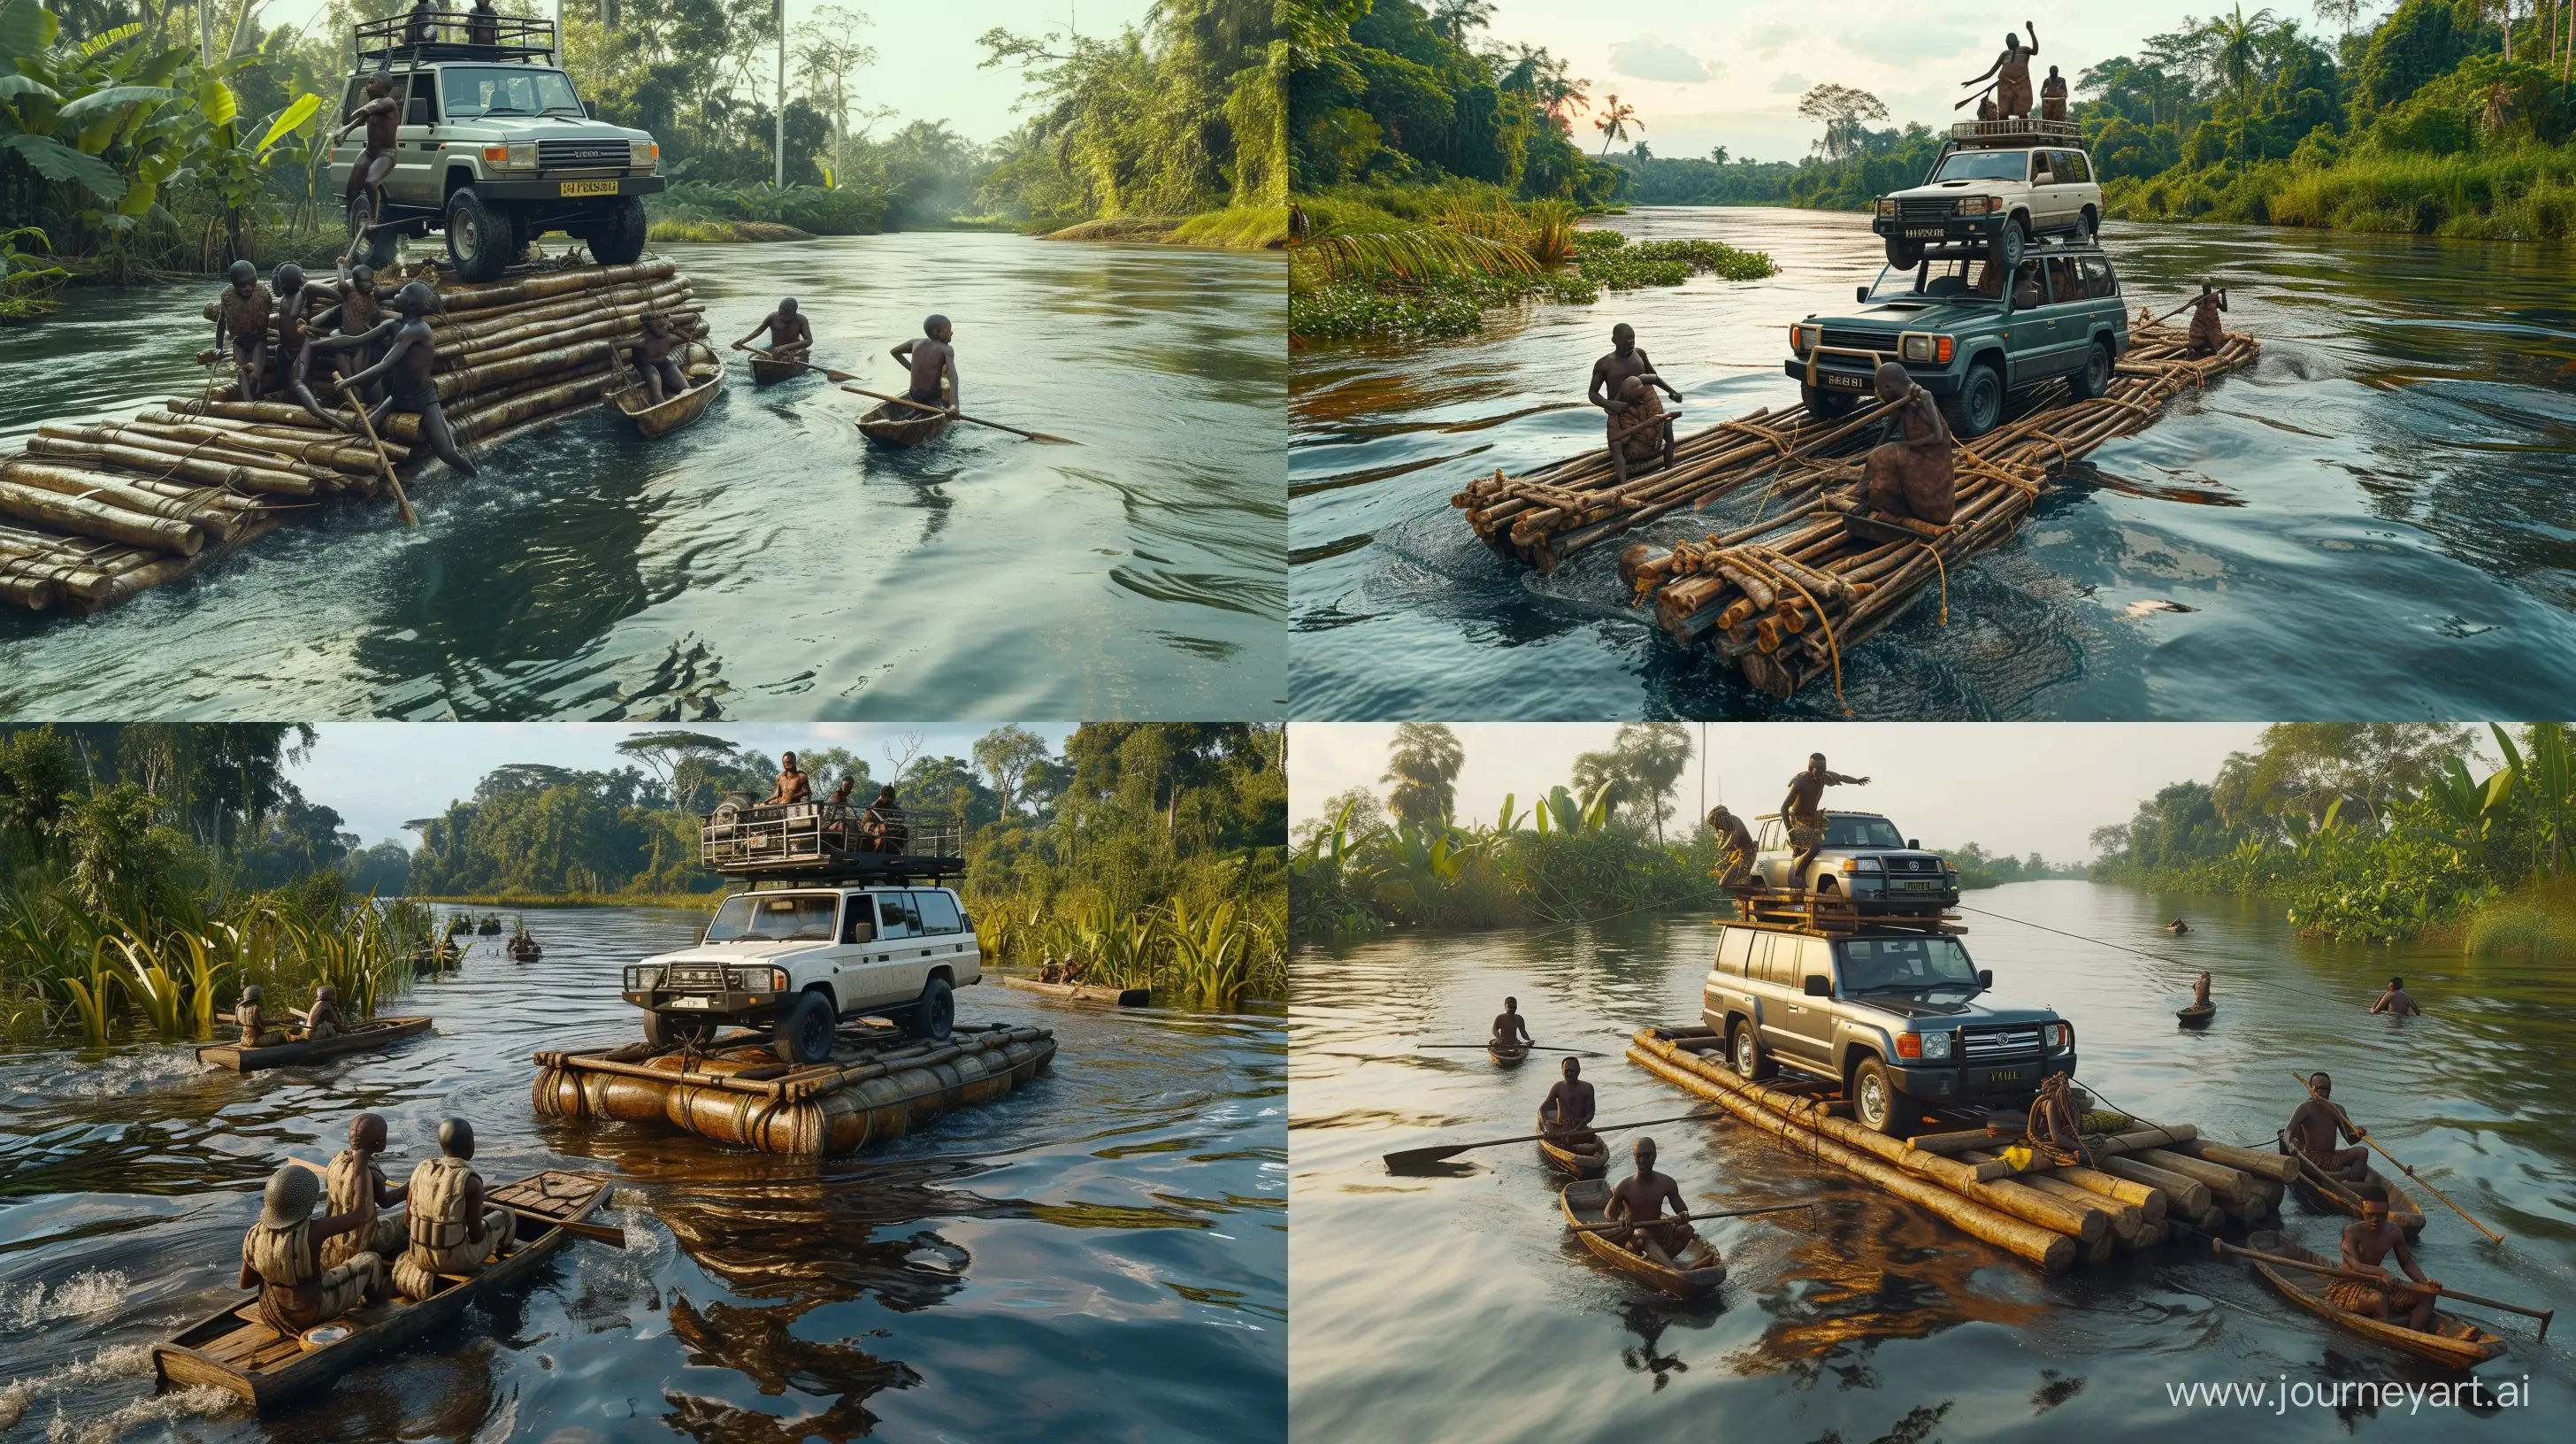 Determined-Bantu-ChildSoldiers-Pulling-Land-Cruiser-on-Raft-in-Tropical-River